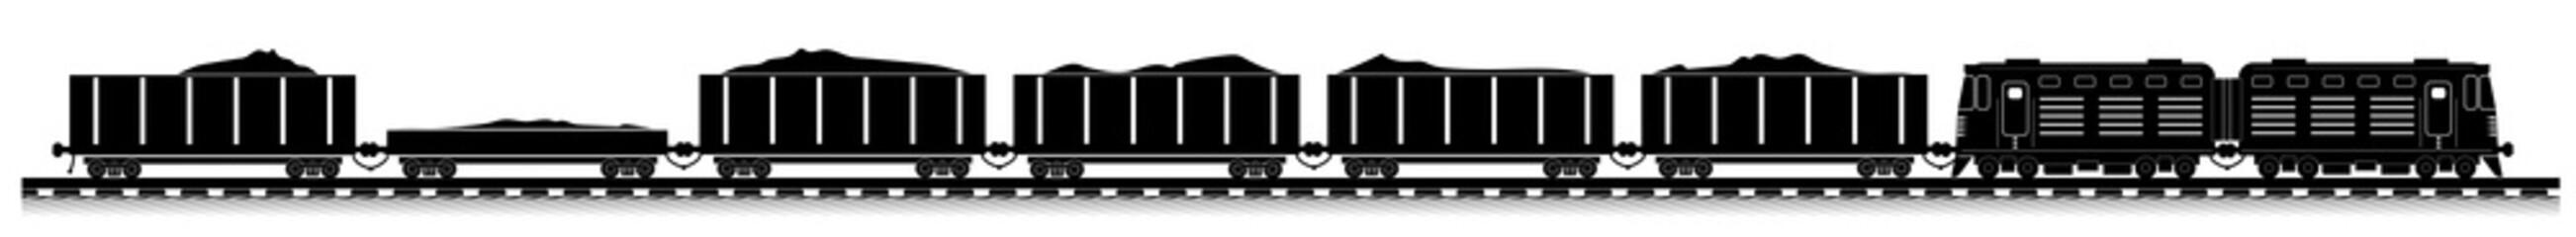 Railway train with locomotive and wagons. Side view. - 242047423